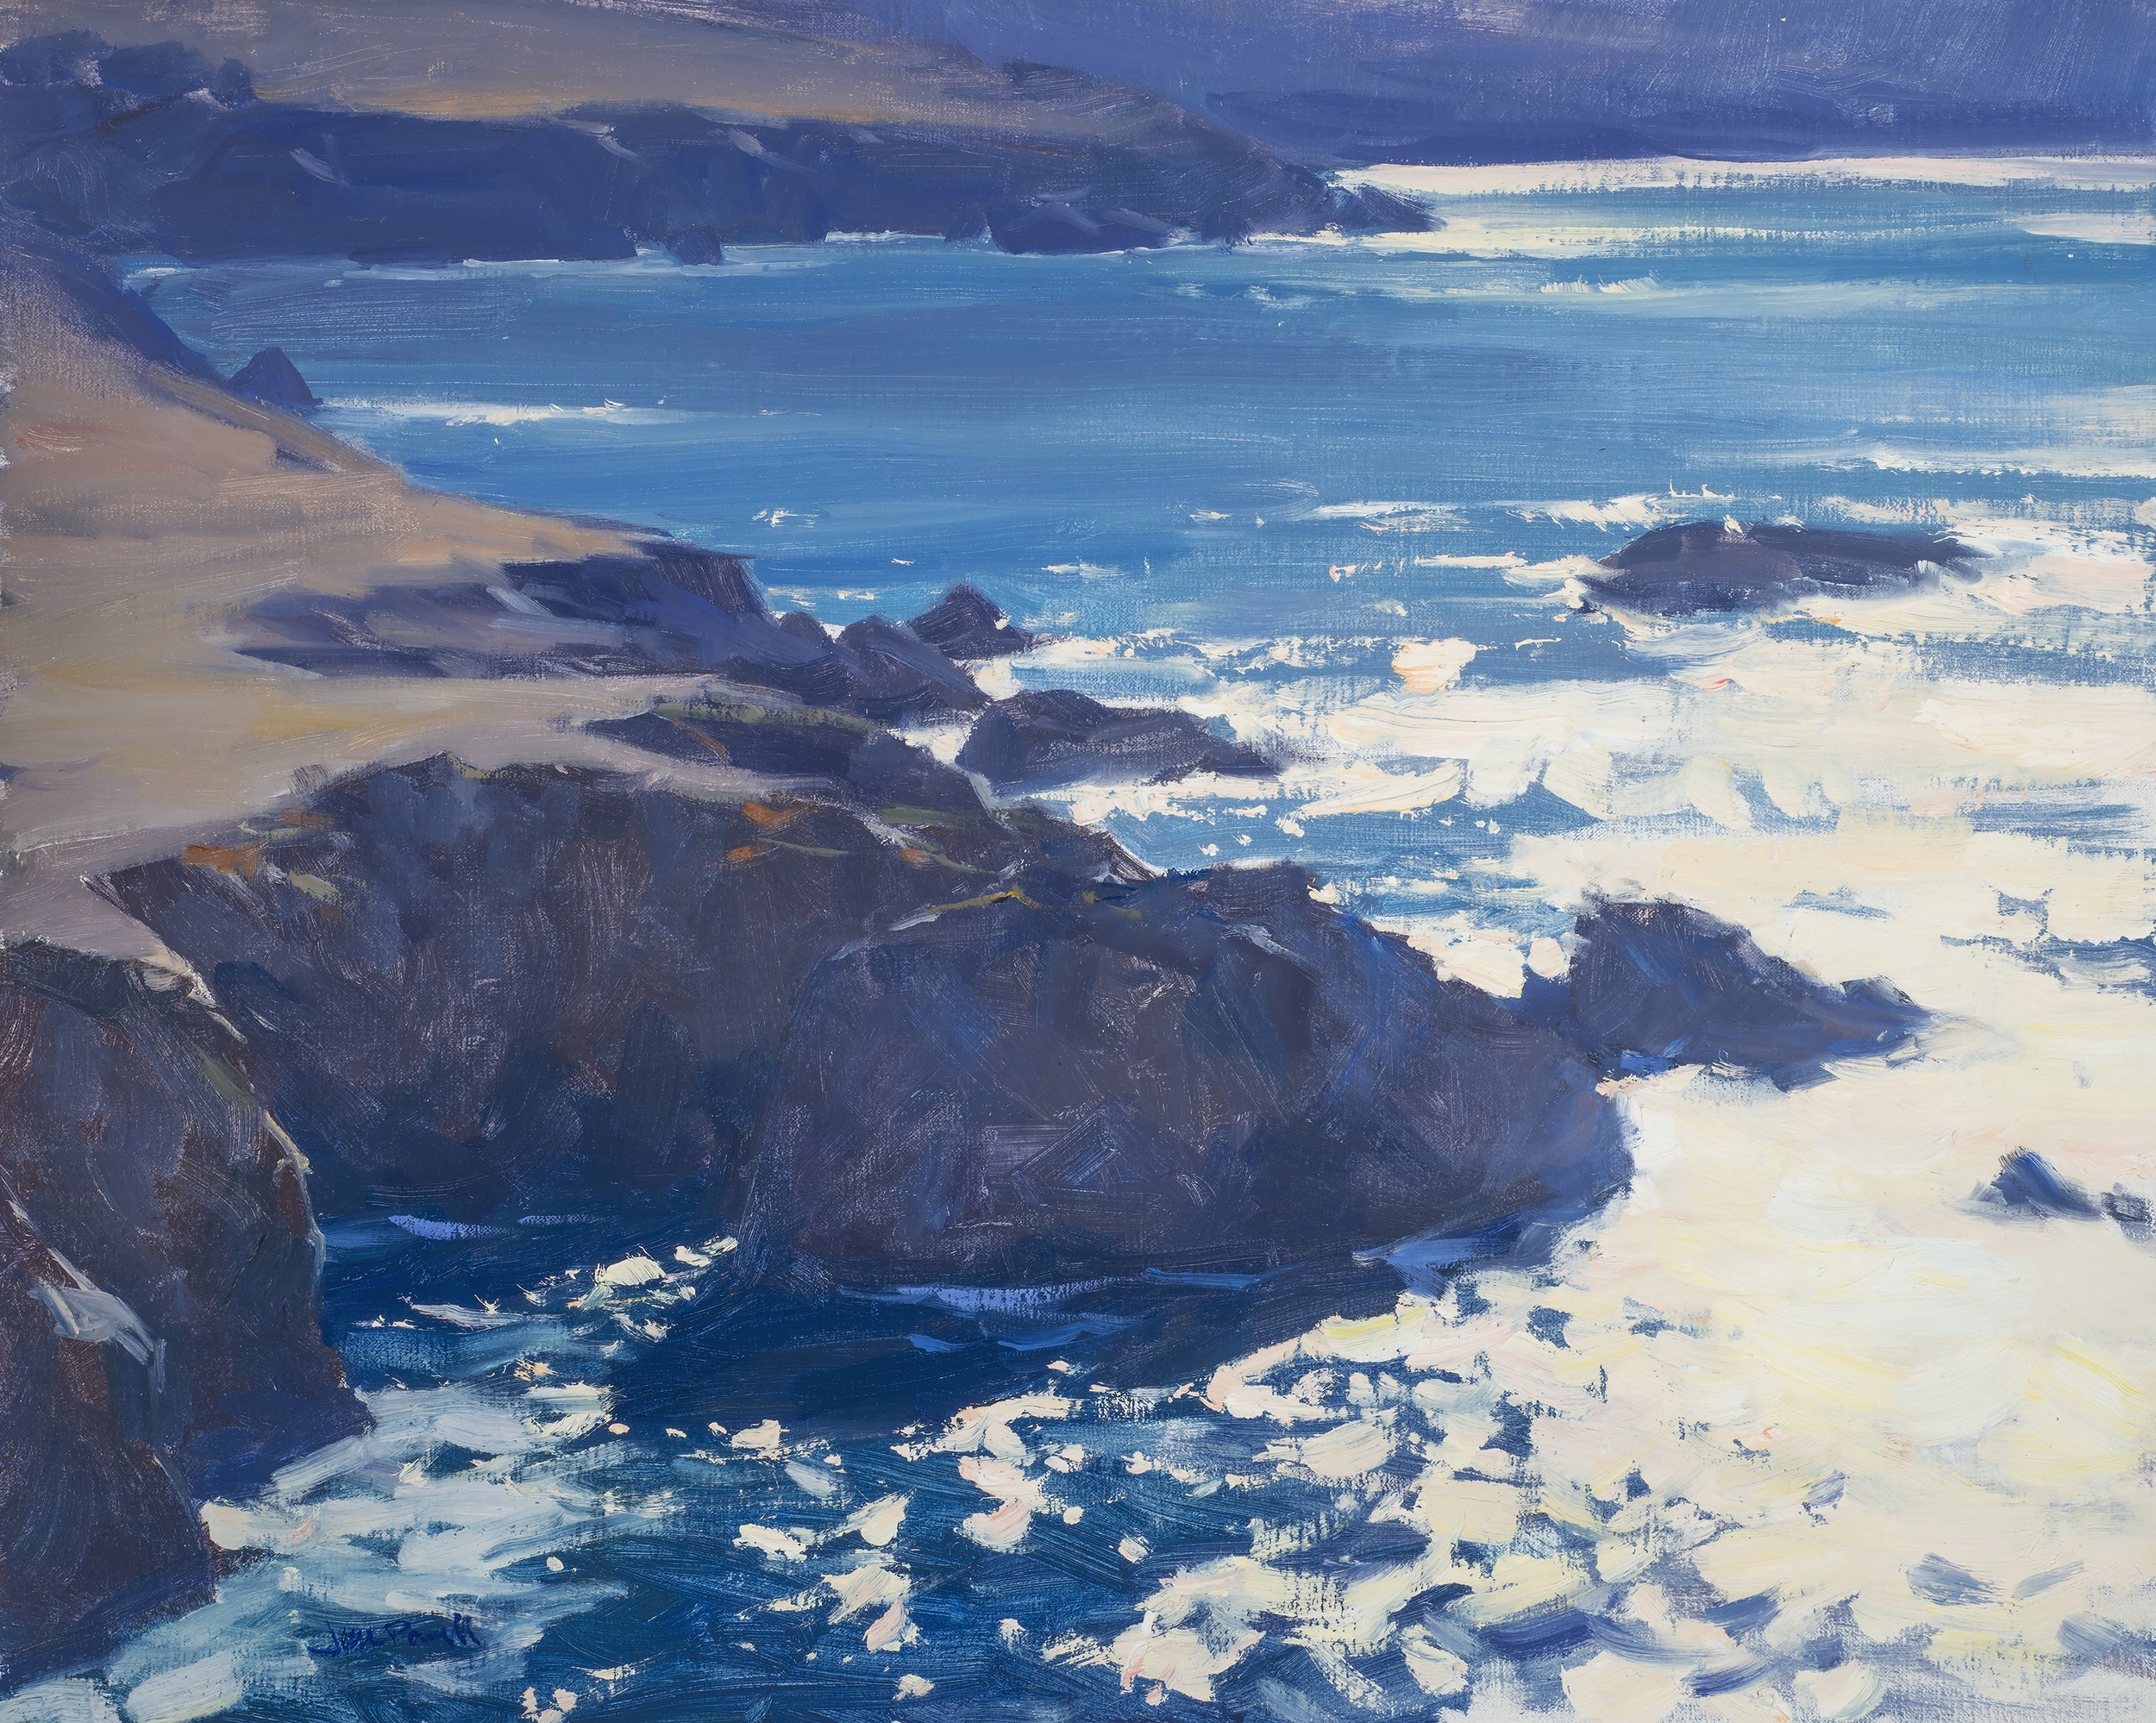  ROCKY POINT GLARE  &nbsp; &nbsp; &nbsp; &nbsp; &nbsp; &nbsp; 16x20 inches, oil on linen  